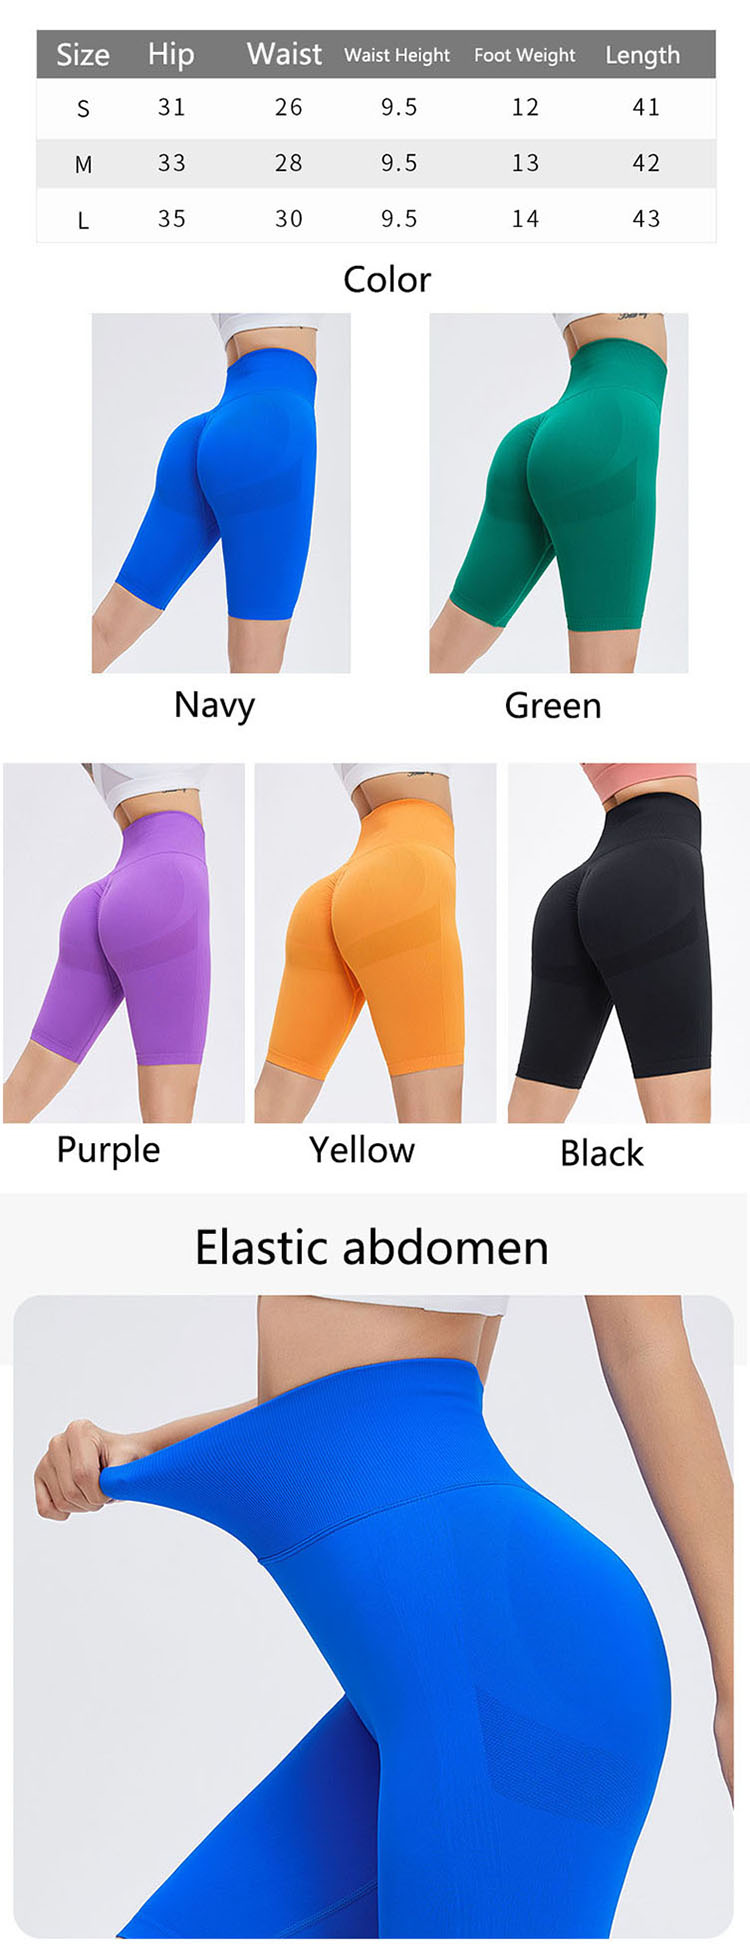 With the rise of multi-performance sports, purple yoga shorts improve the visual body shape